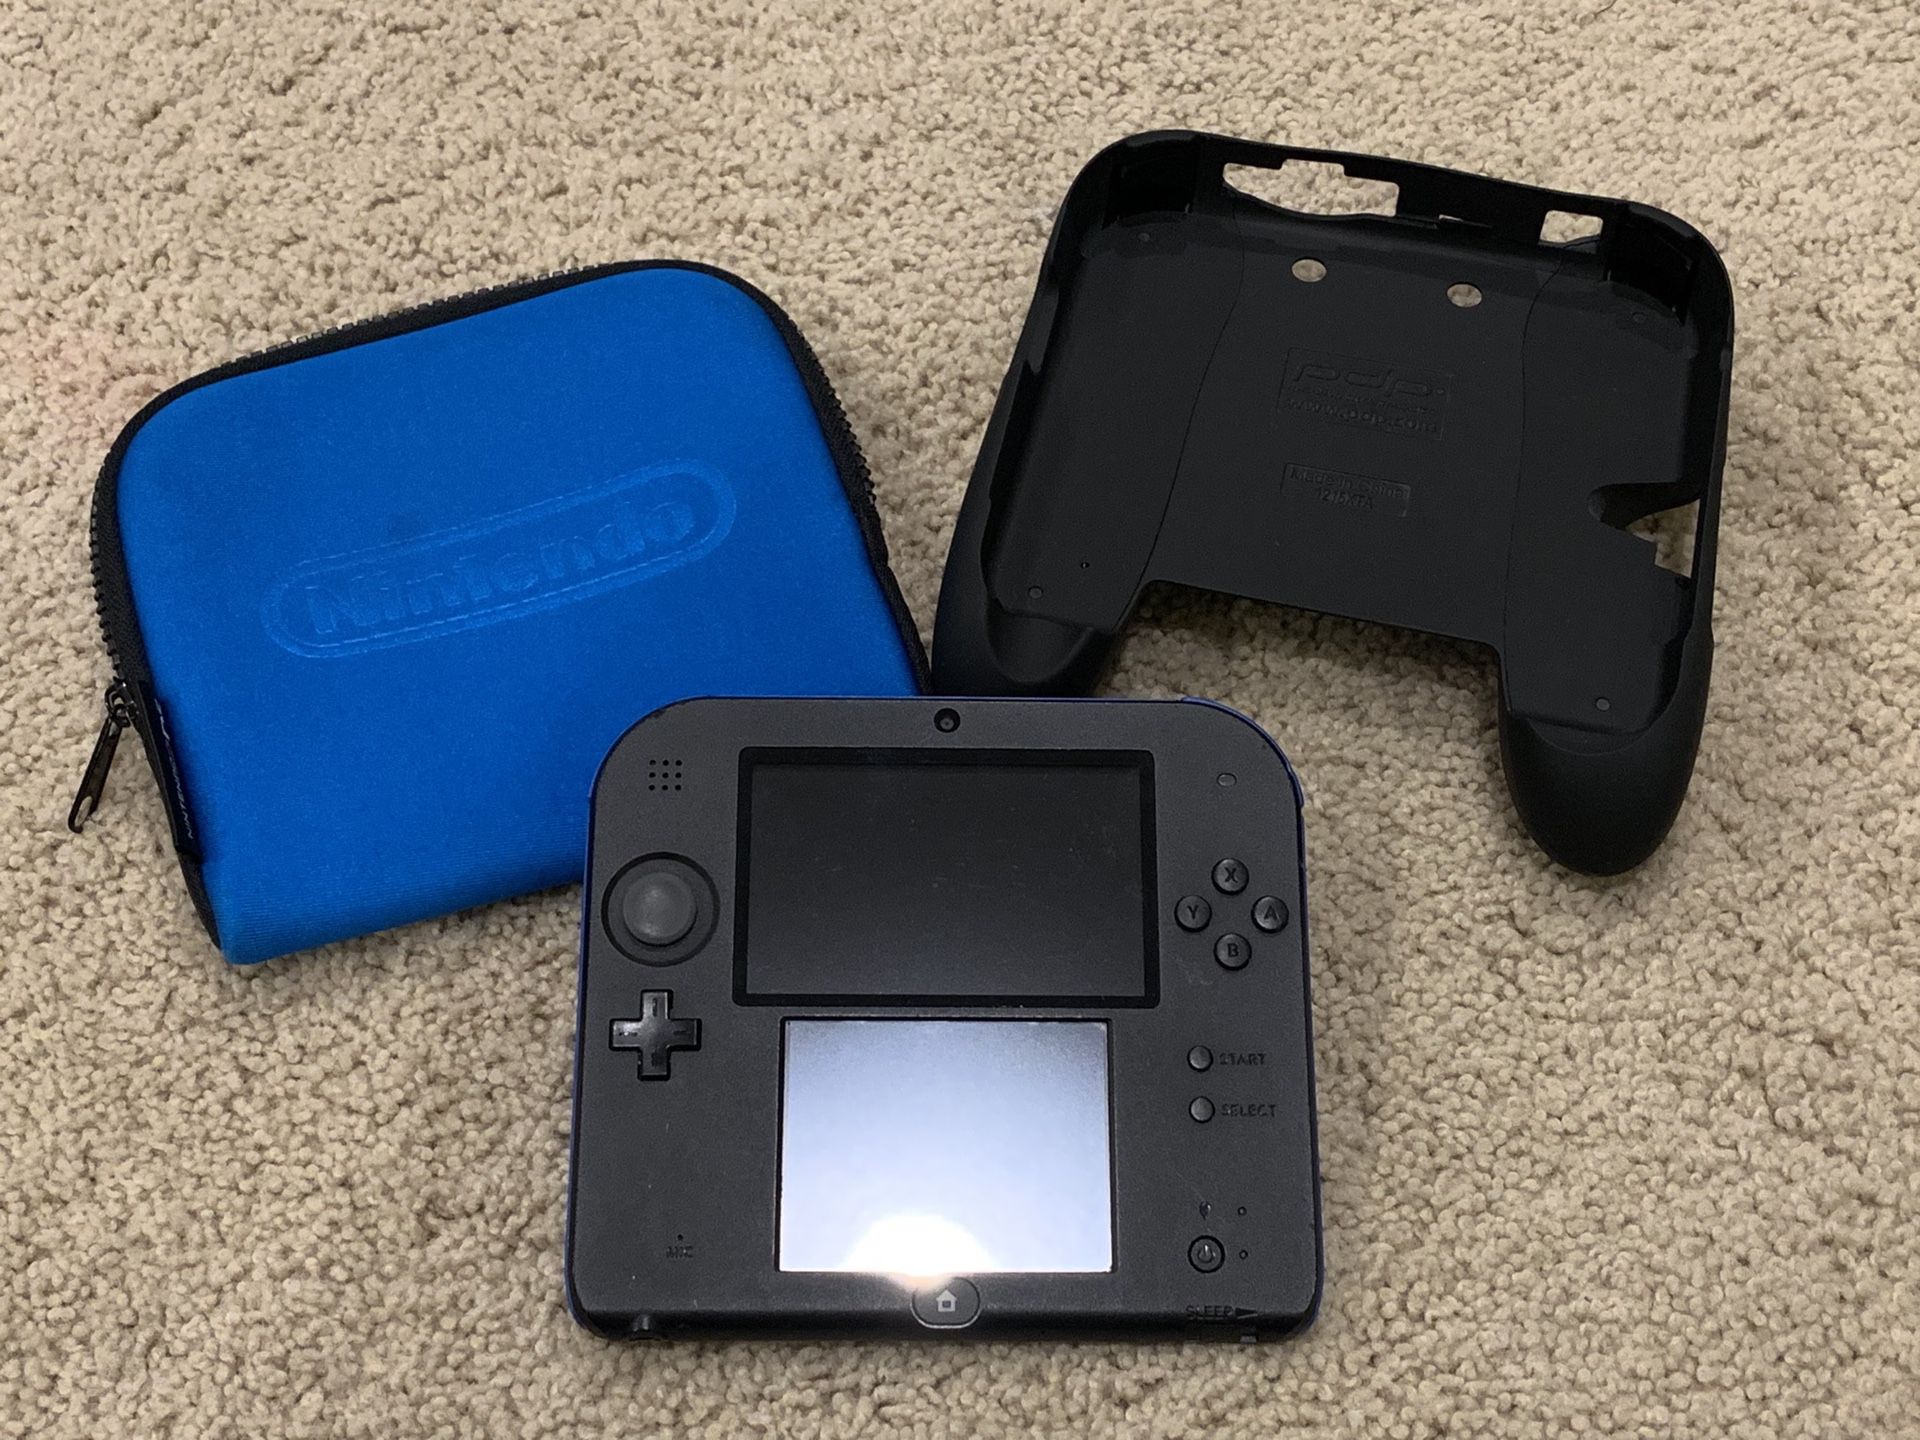 Nintendo 2DS with case and trigger grips